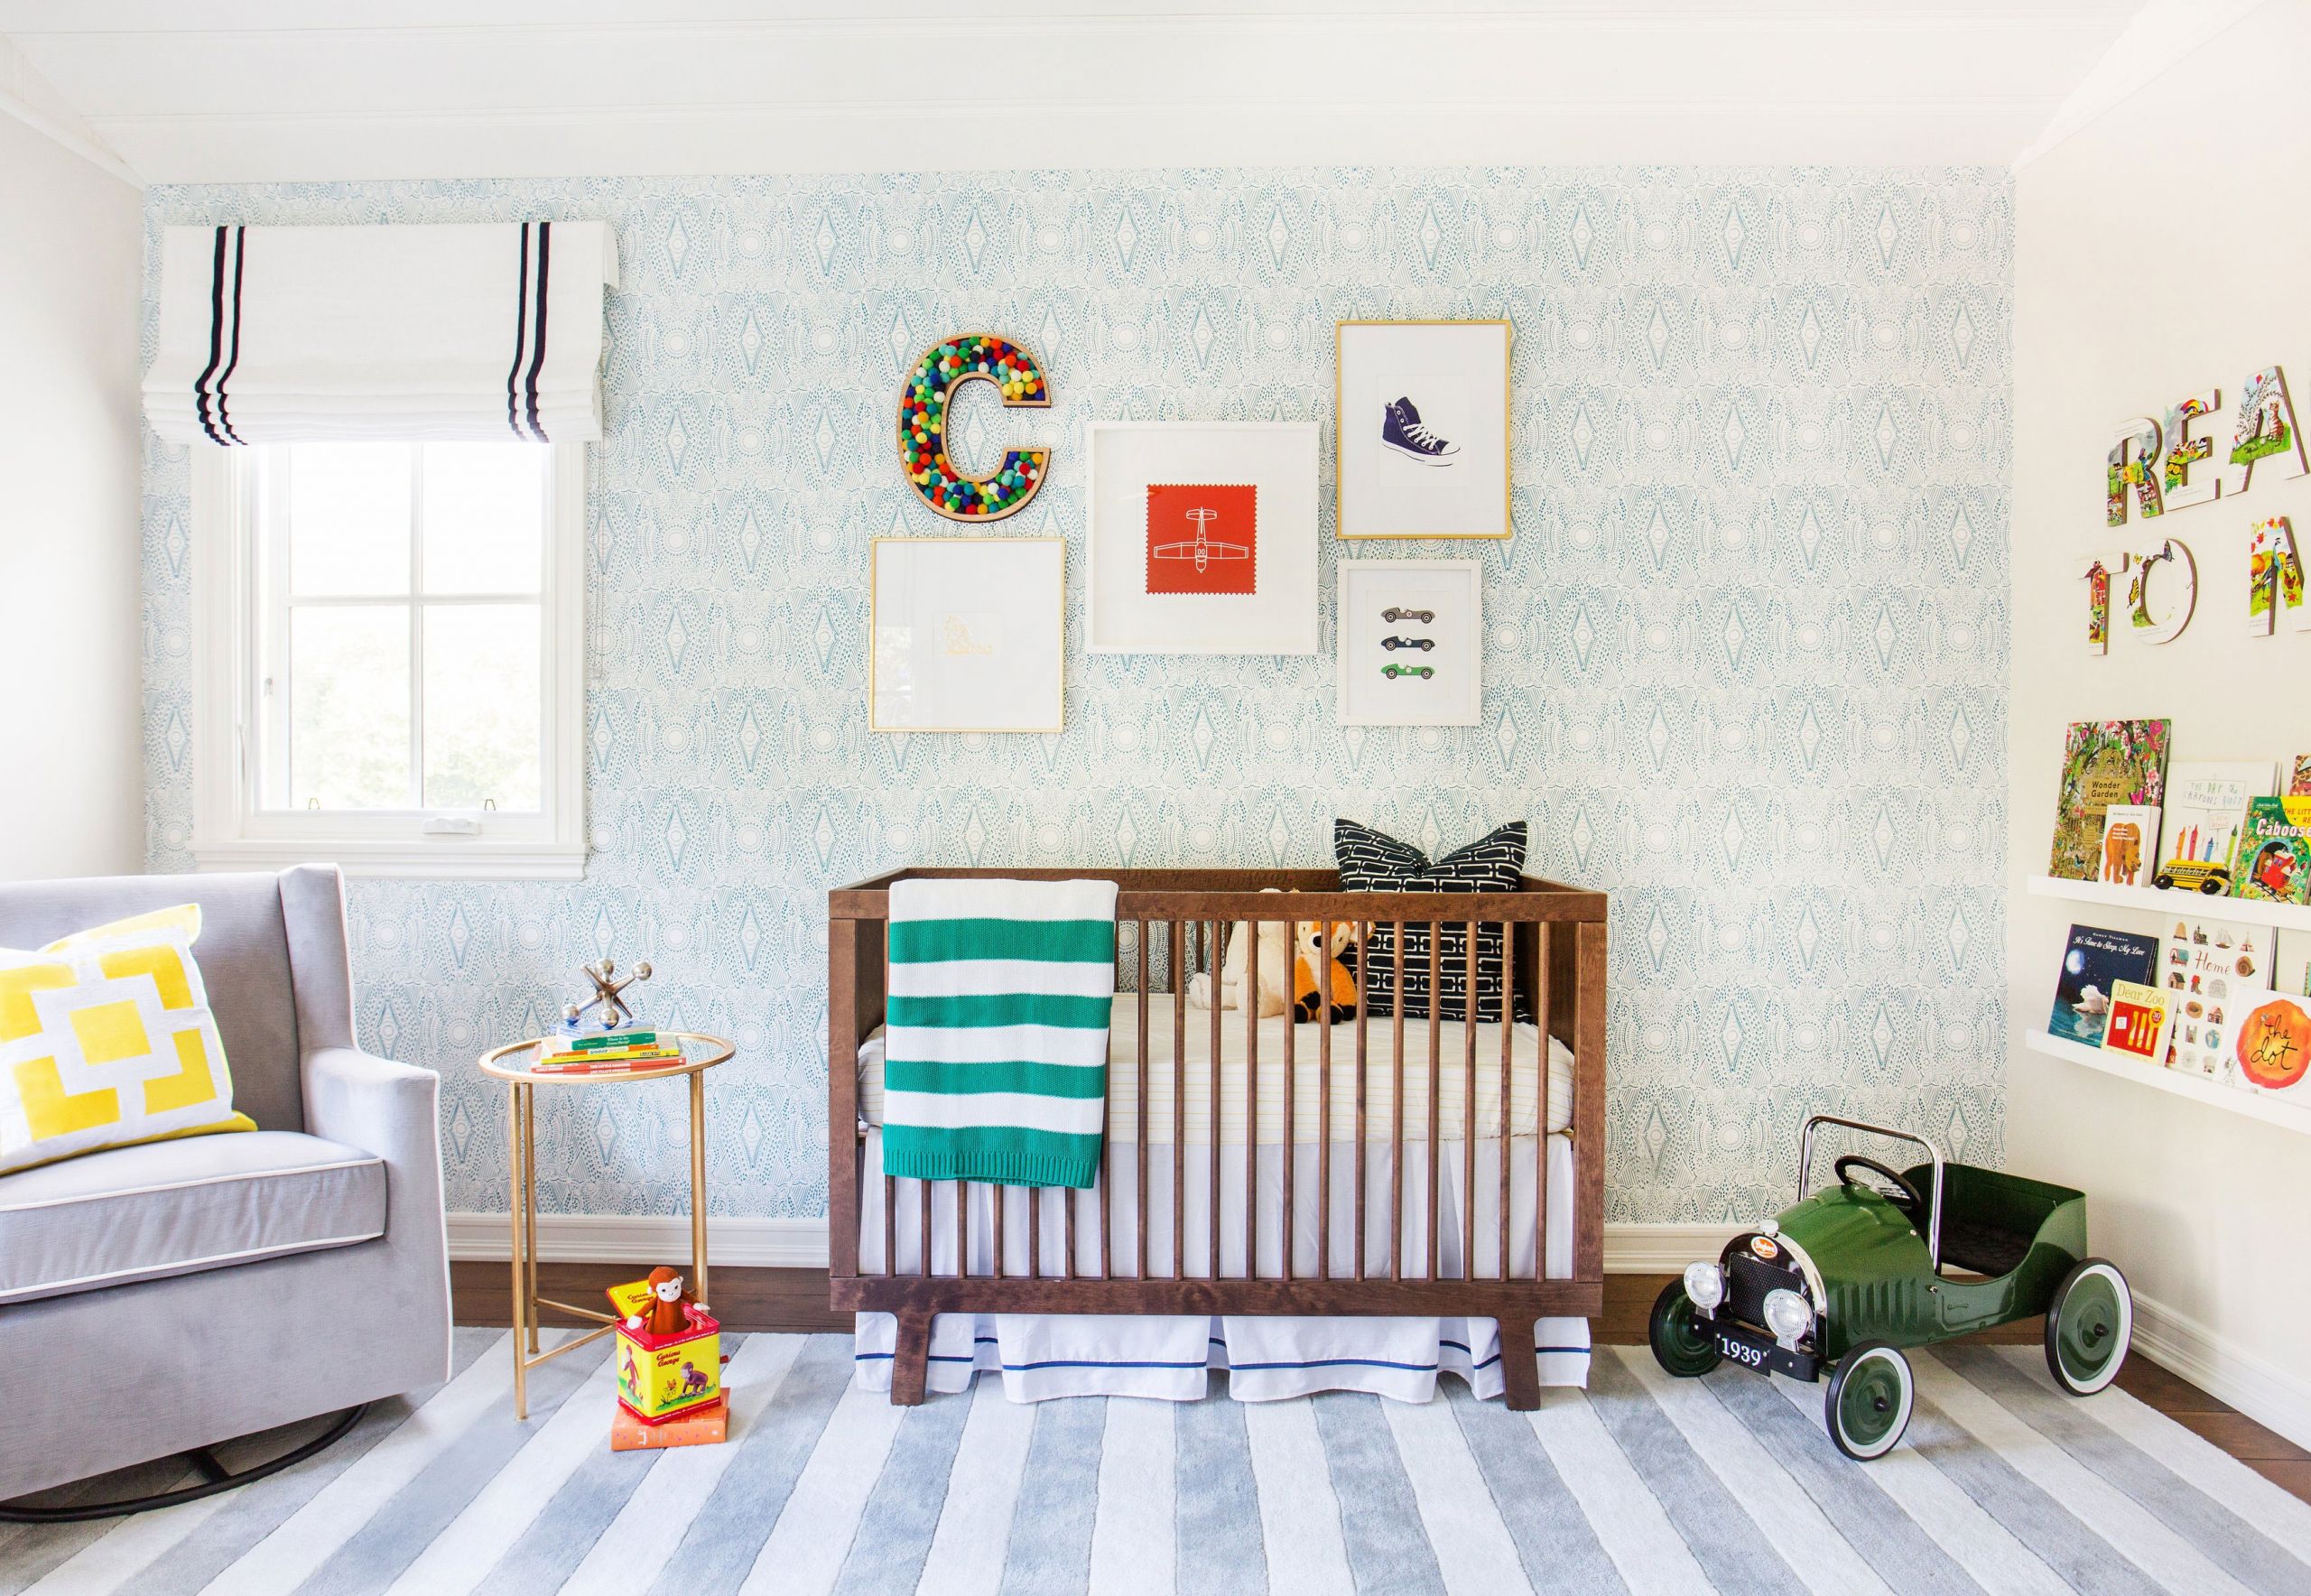 Kids Room Decor
 3 Wall Decor Ideas Perfect for Kids’ Rooms s